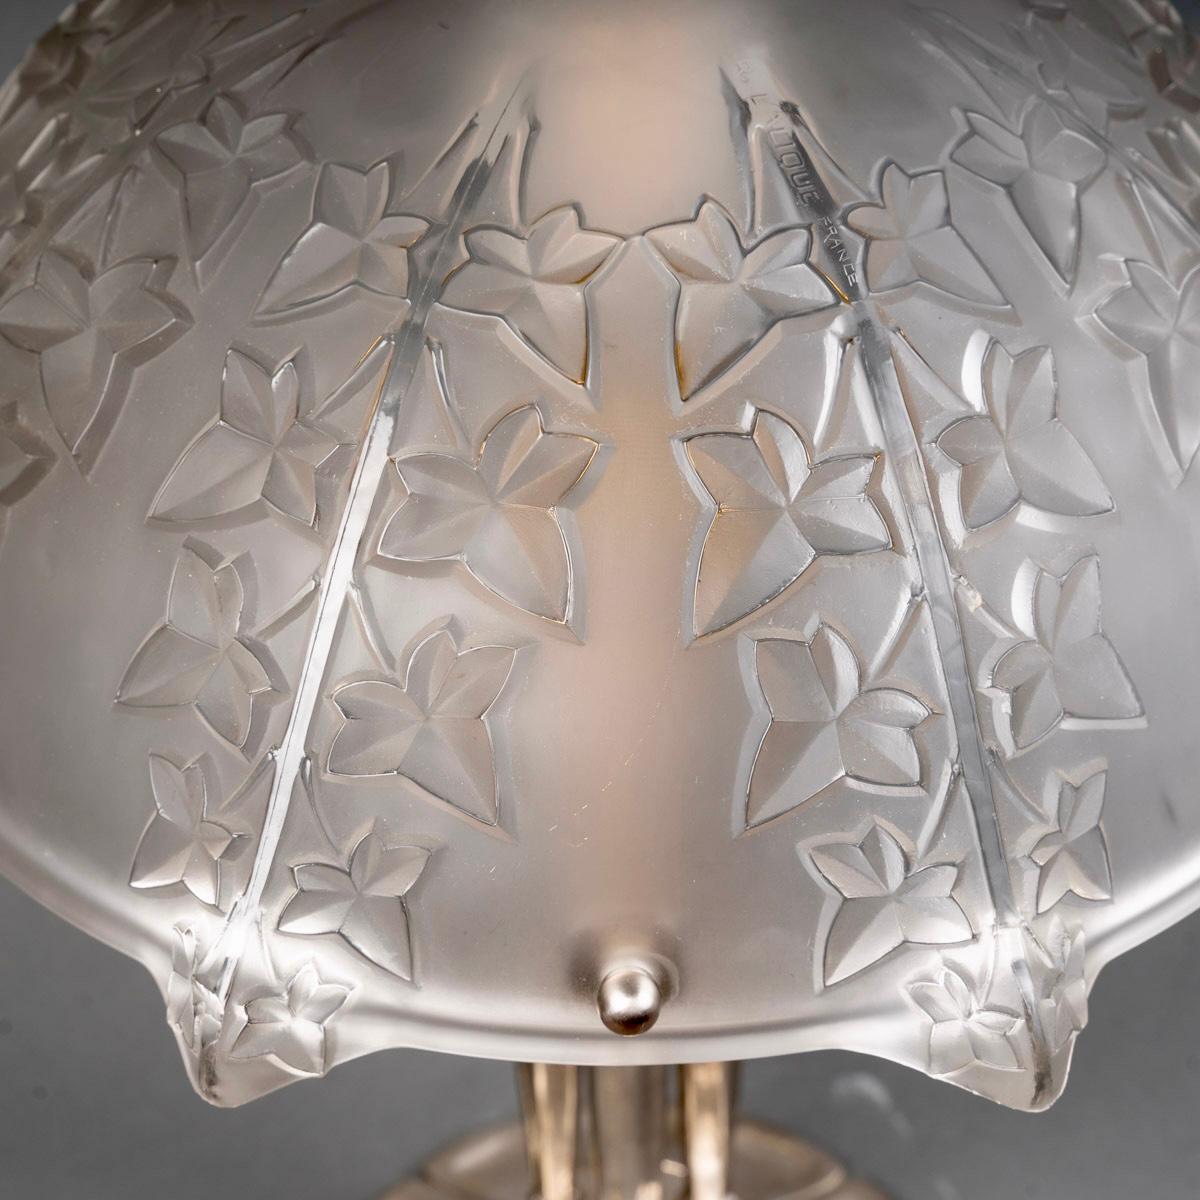 1927 René Lalique - Pair Of Lamps Lierre Ivy Glass & Nickeled Bronze  In Good Condition For Sale In Boulogne Billancourt, FR